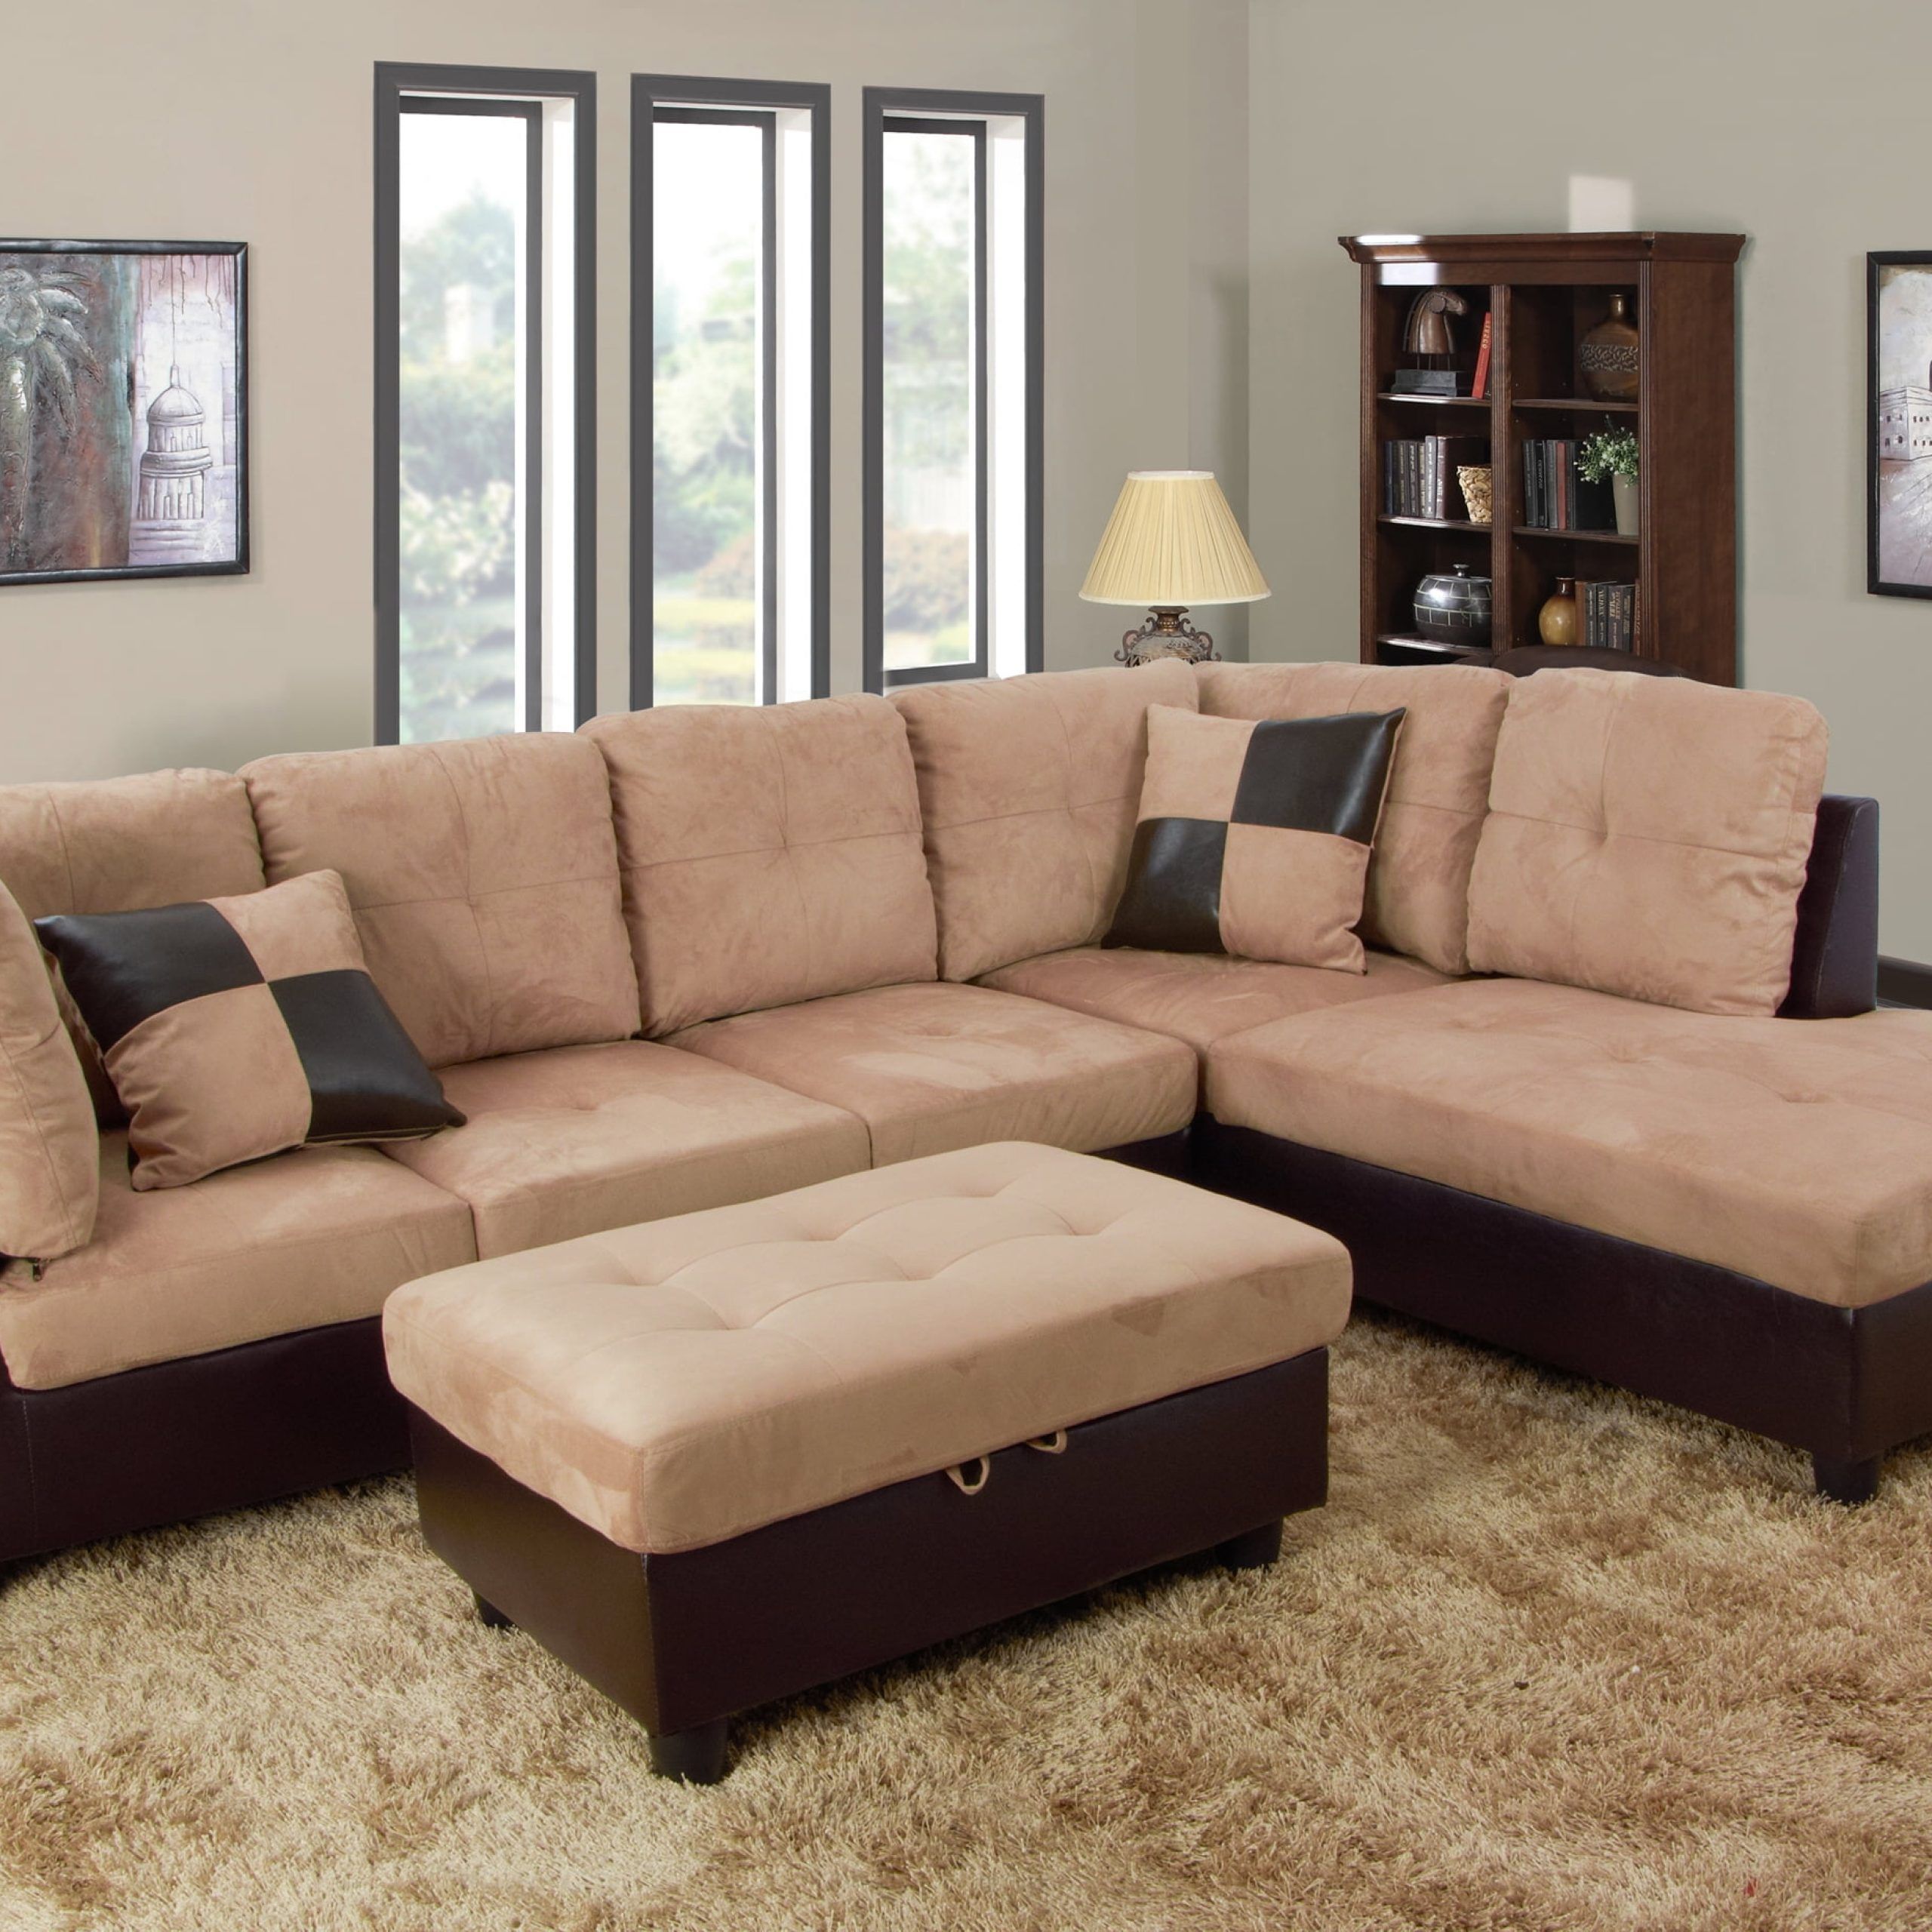 Aycp Furniture 3pcs L Shape Sectional Sofa Set, Left Hand Facing Chaise Pertaining To Small L Shaped Sectional Sofas In Beige (View 15 of 20)